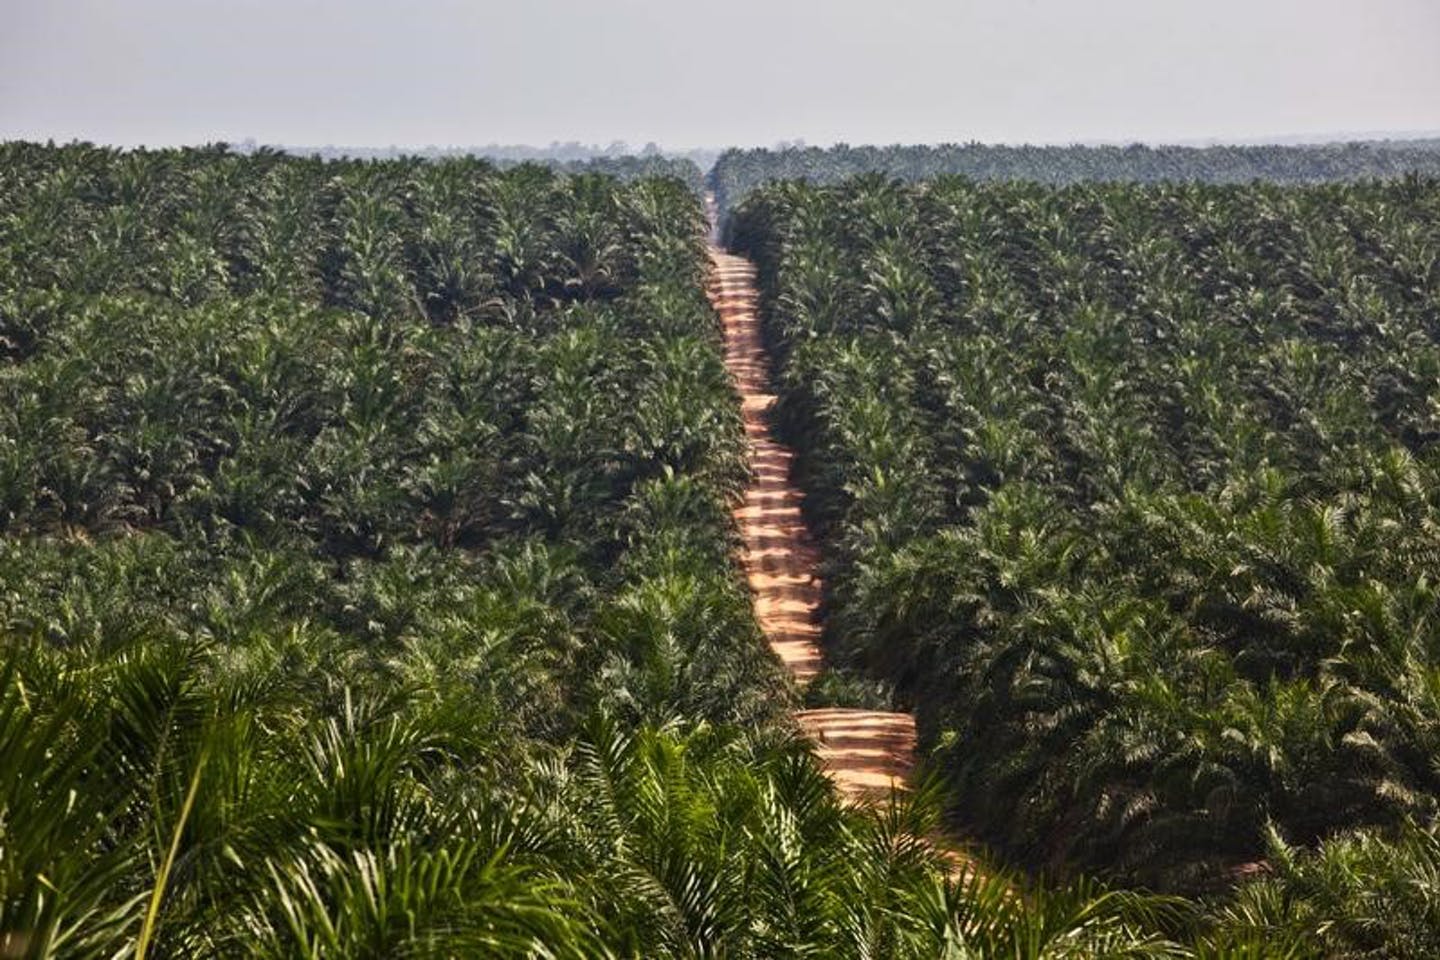 KGI: First Resources (FR SP): Palm oil prices are near all-time highs again